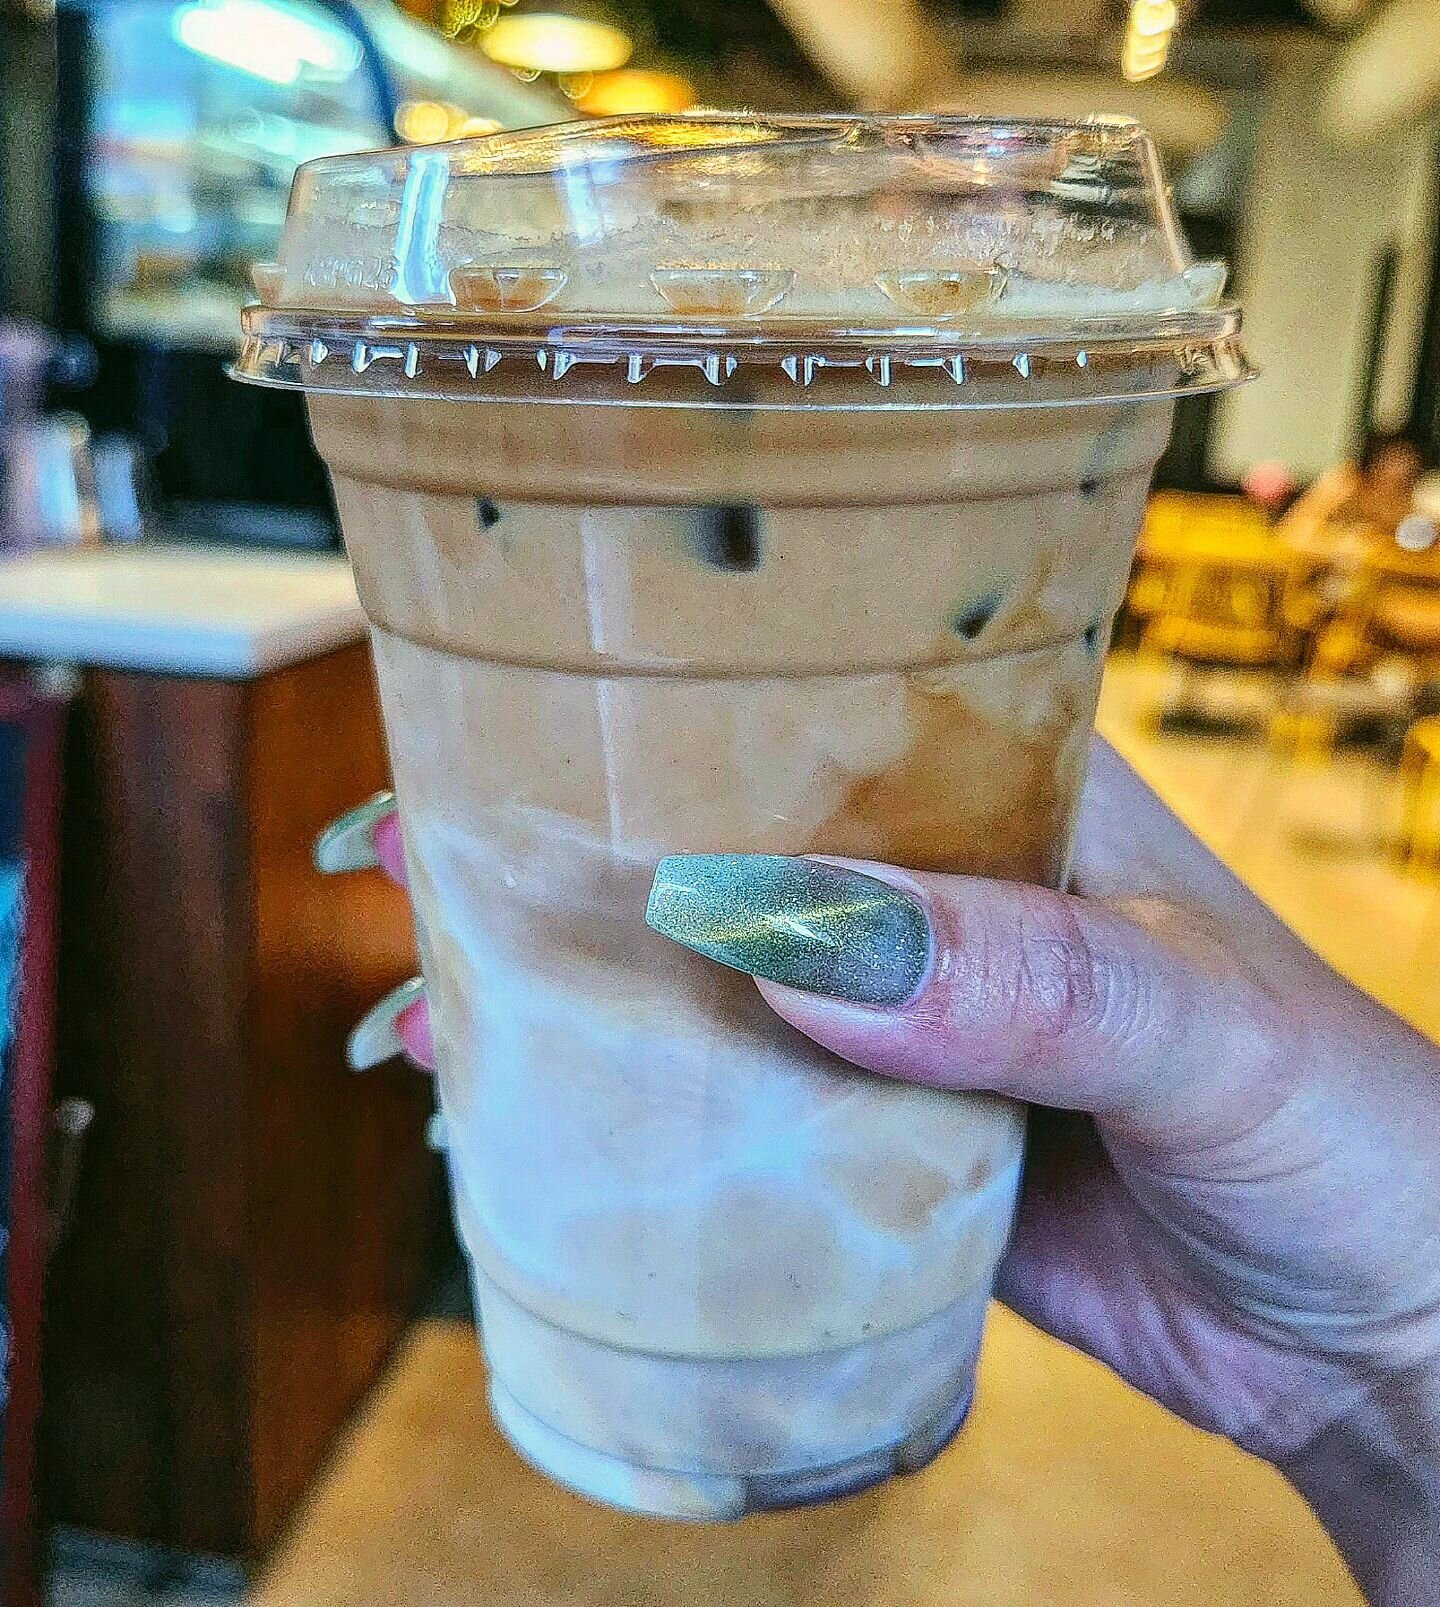 Iced Latte and a few sweet treats to go ☕️✨️ from @thesocialblend_ 💞
.
.
.
.
.
#food #foodie #foodpics #coffee #latte #pastry #dessert #cake #cafe #yelpelite #yelp #brampton #mississauga #toronto #torontofood #lifestyle